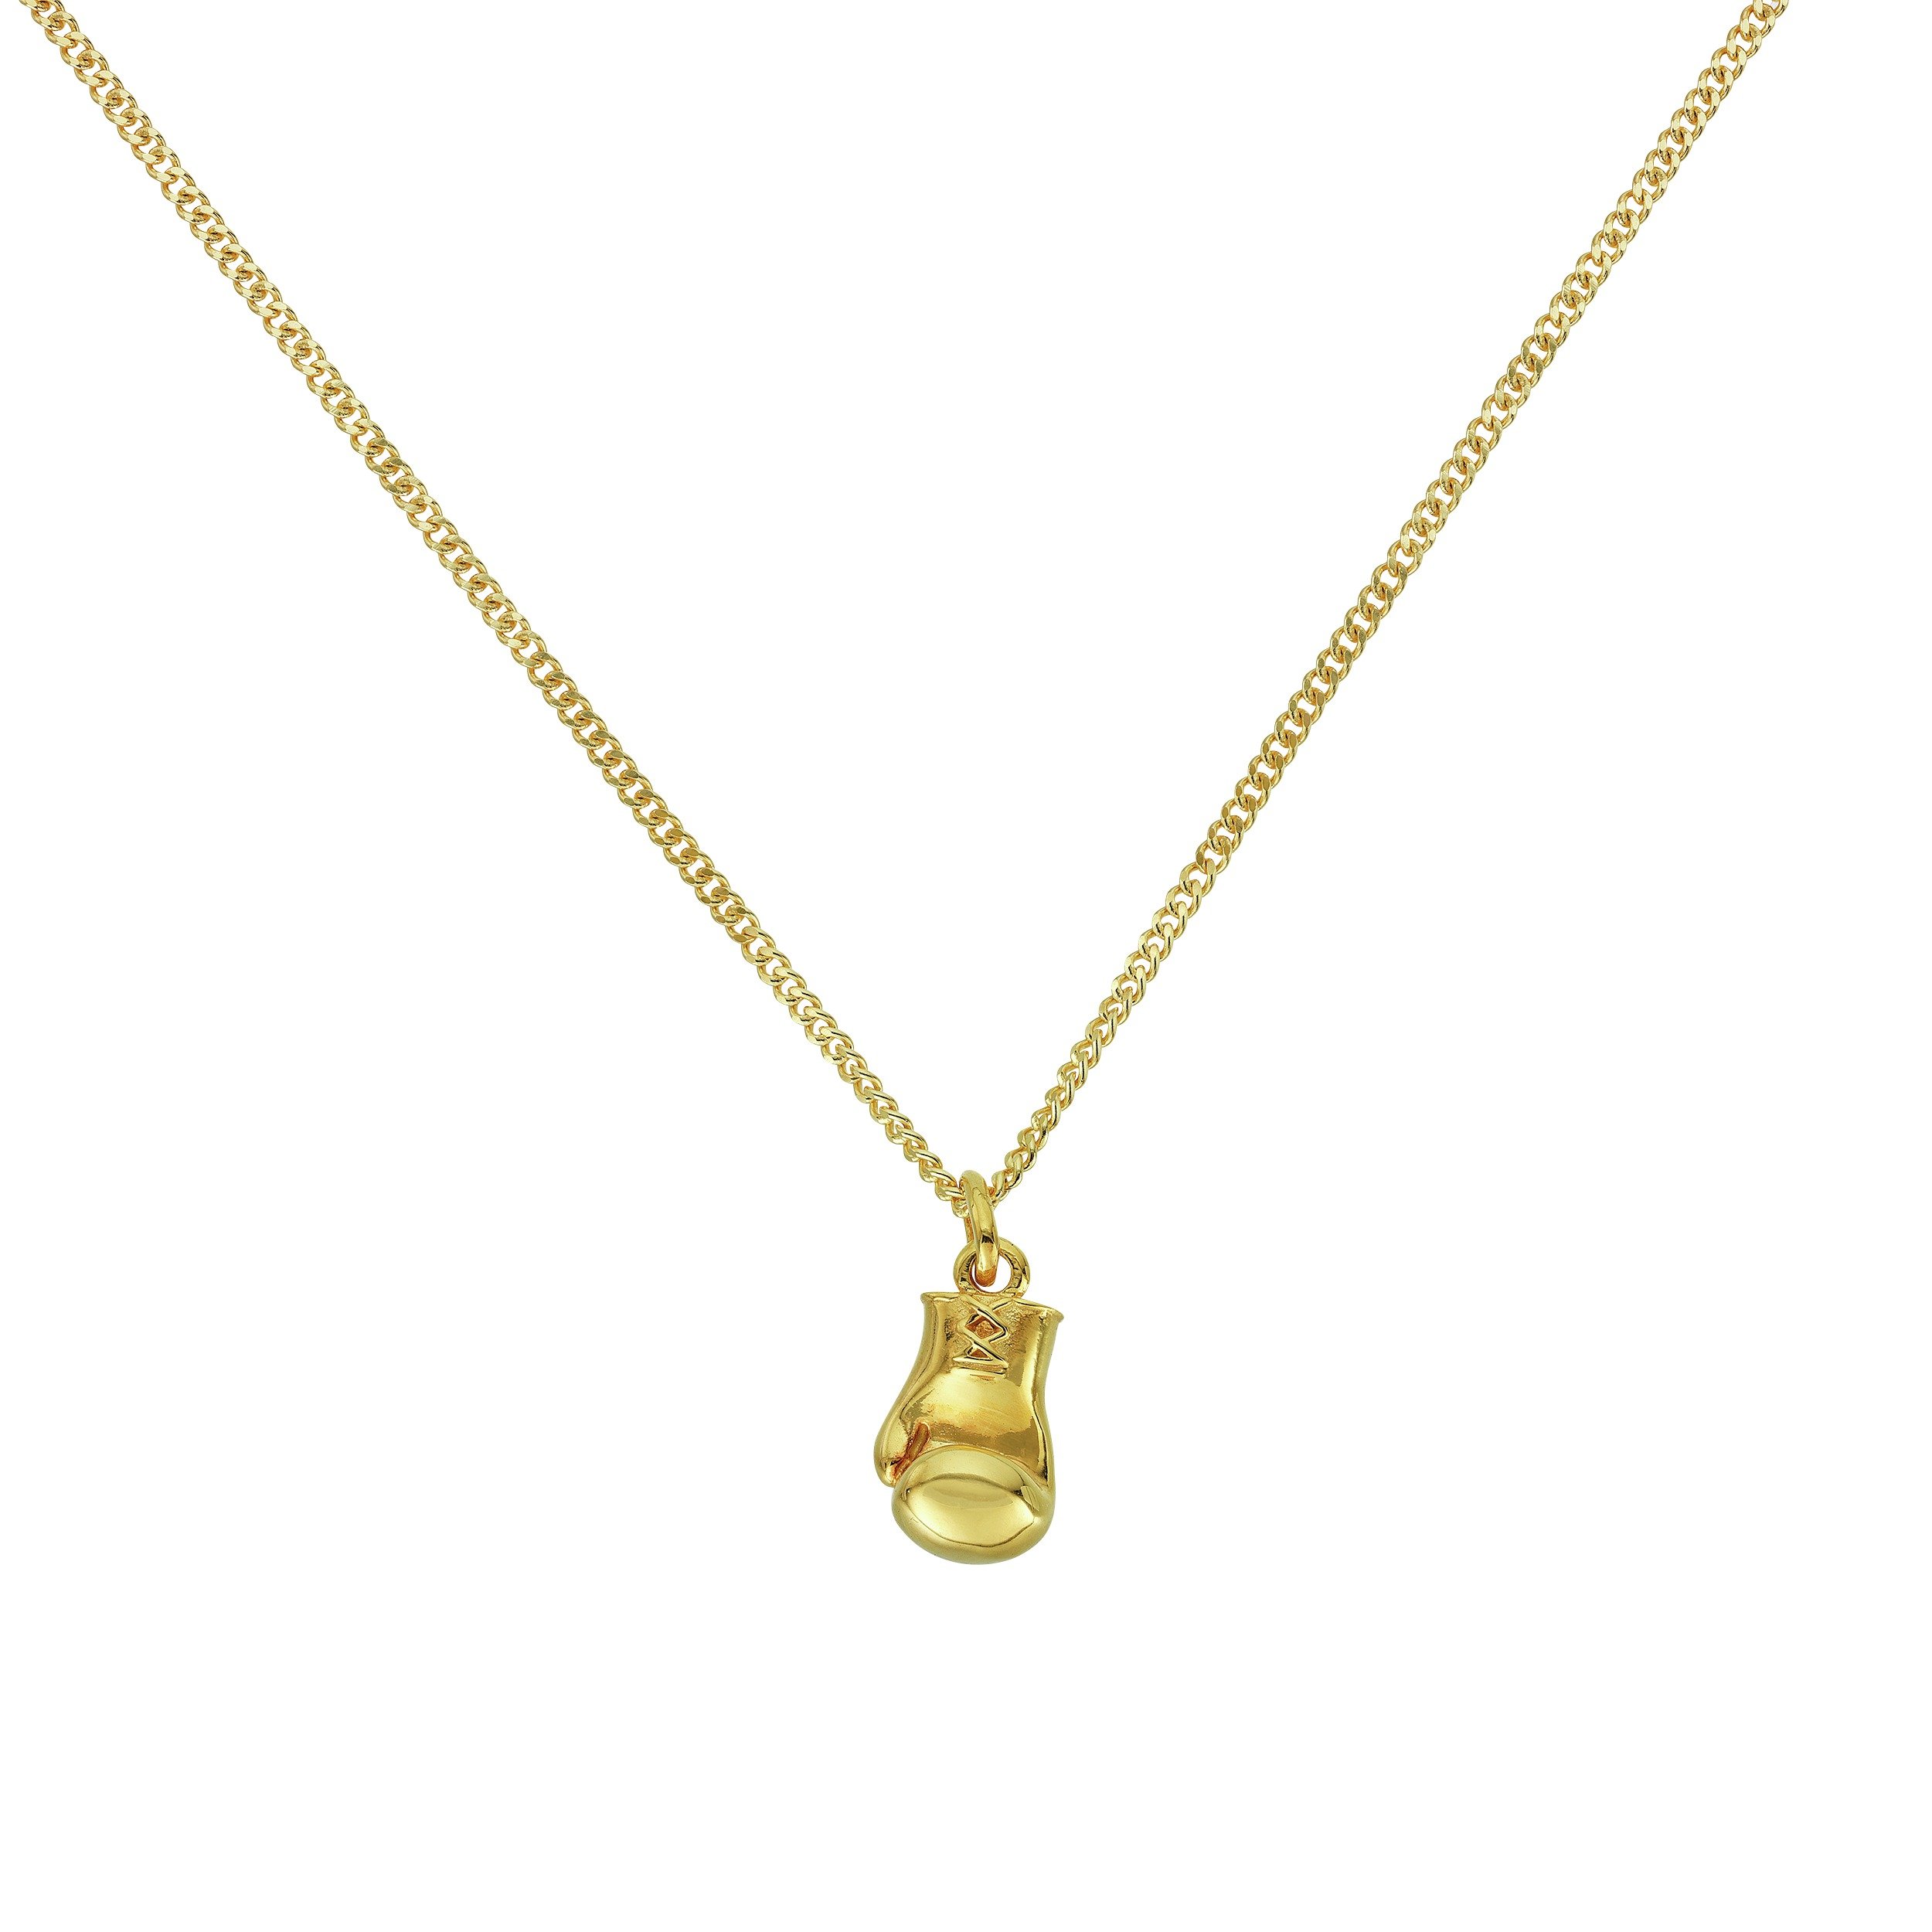 gold chain and pendant